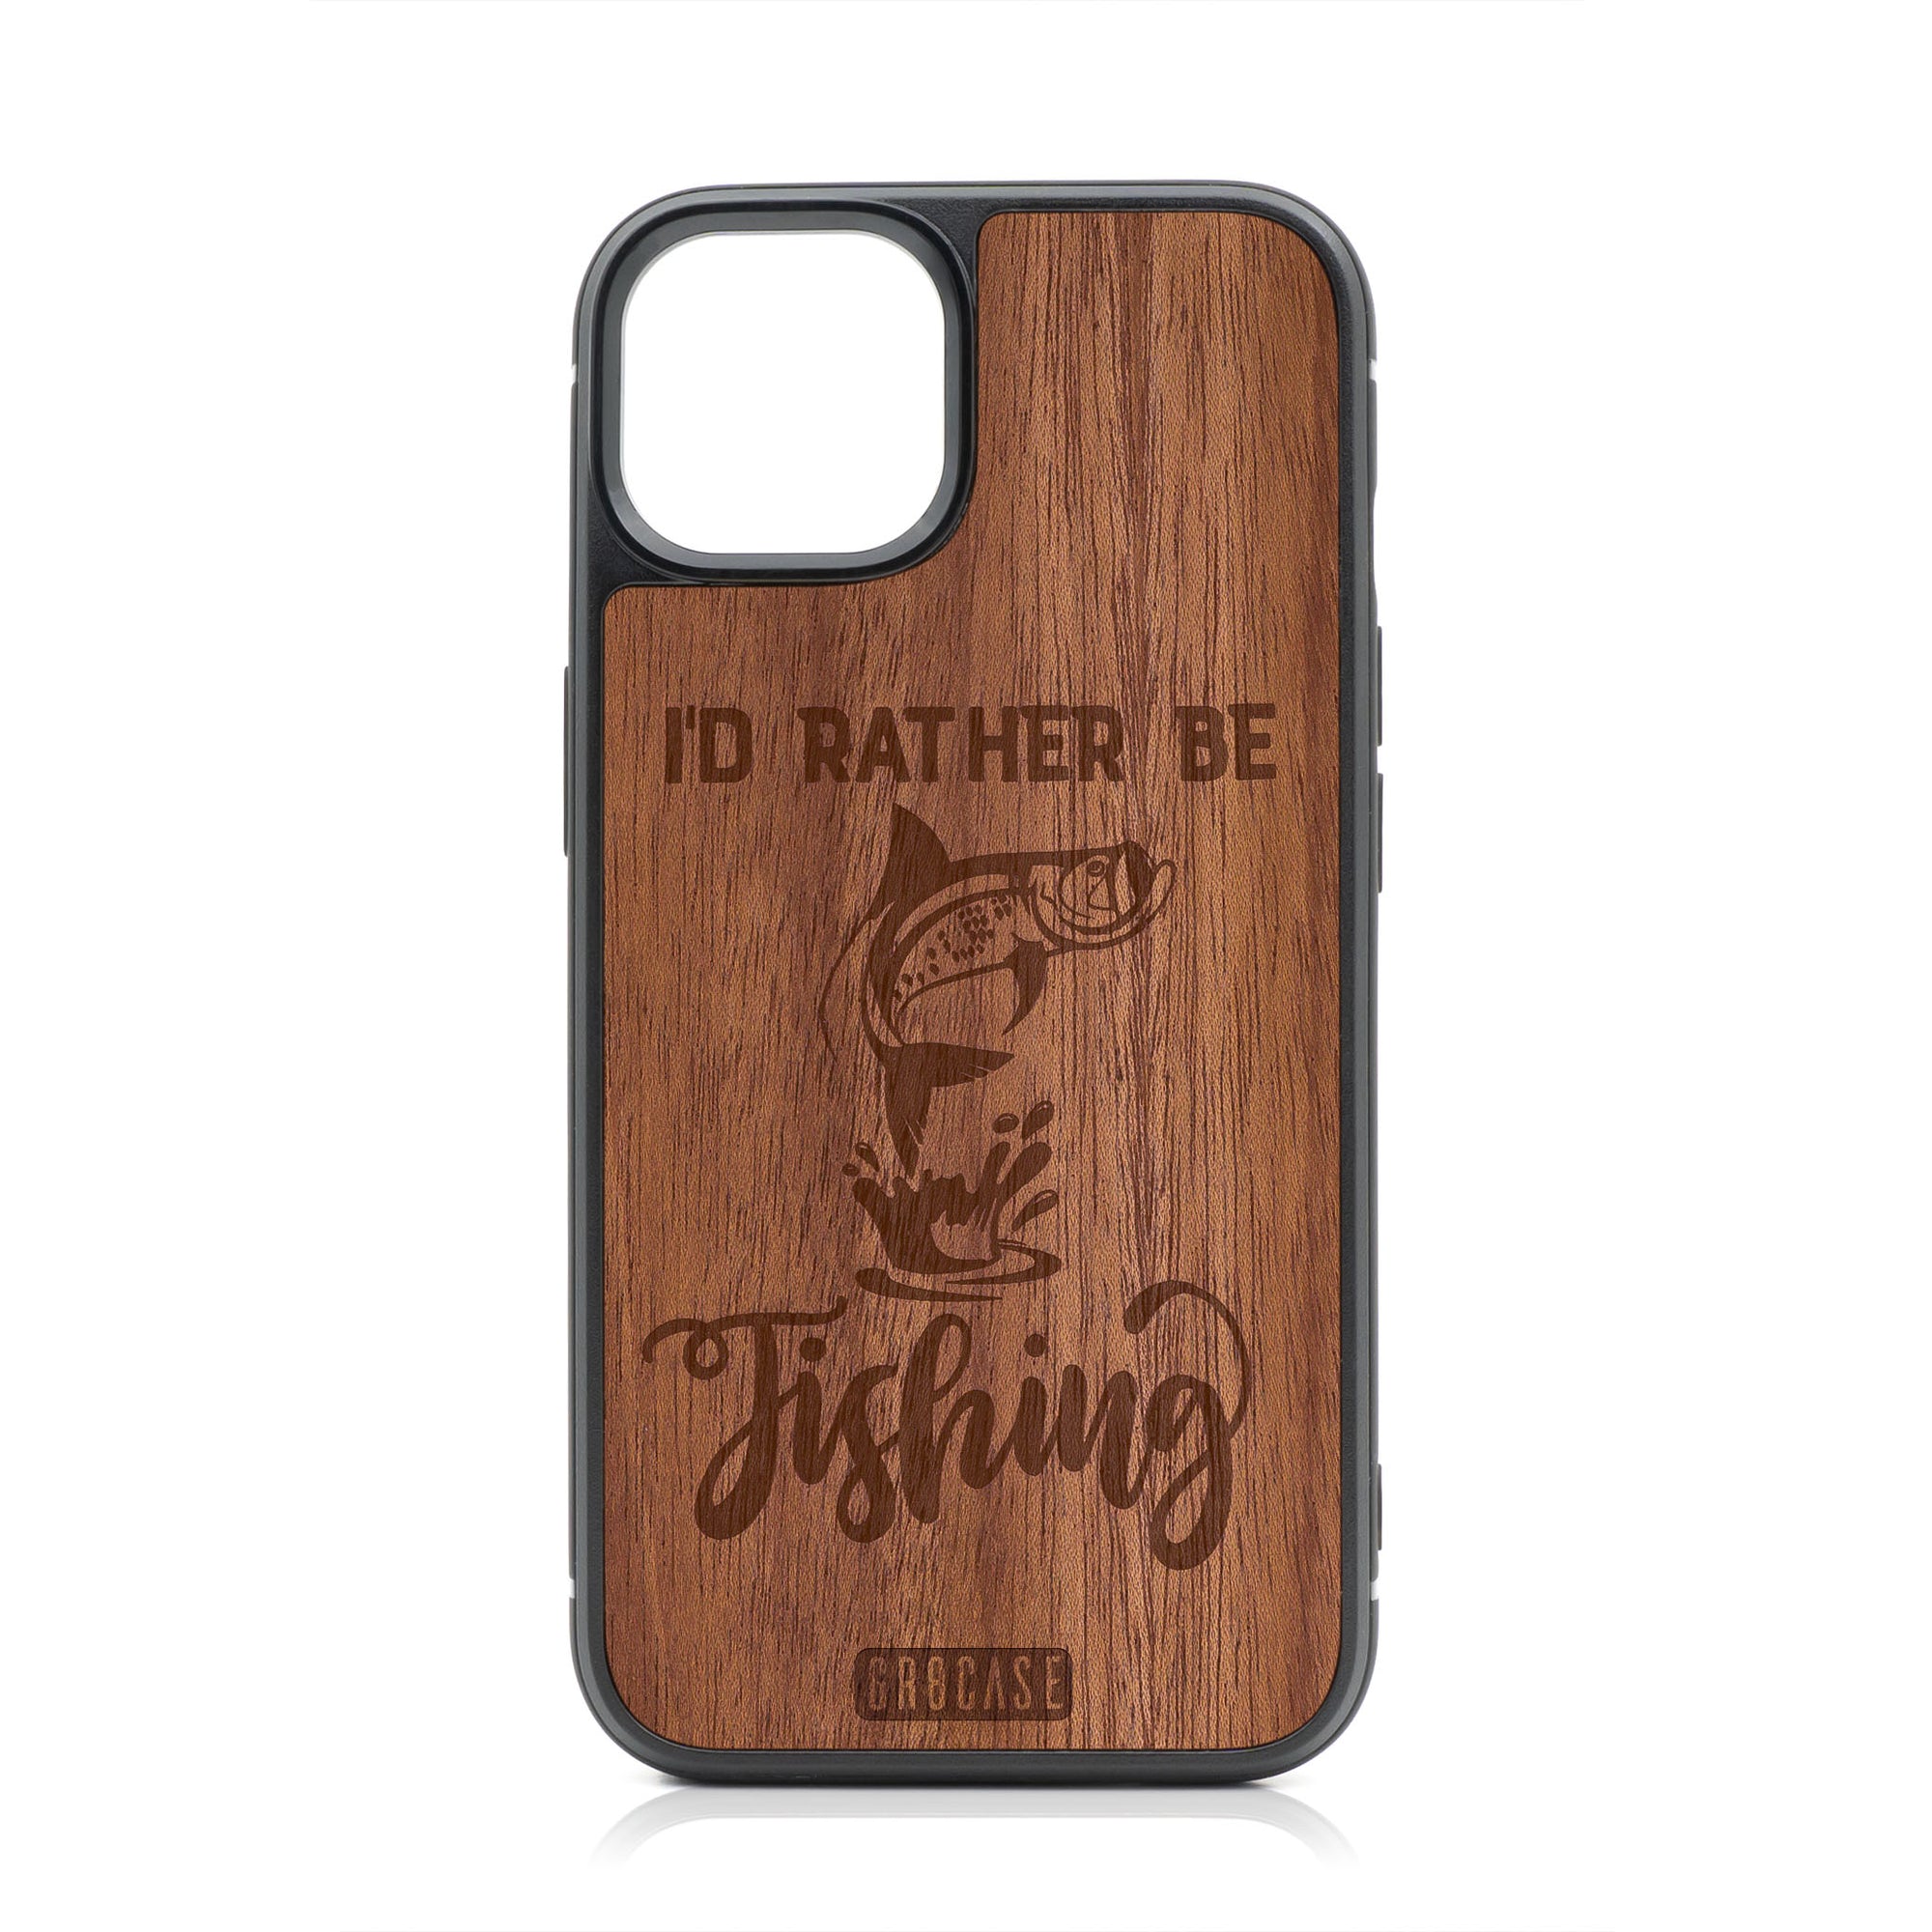 I'D Rather Be Fishing Design Wood Case For iPhone 13